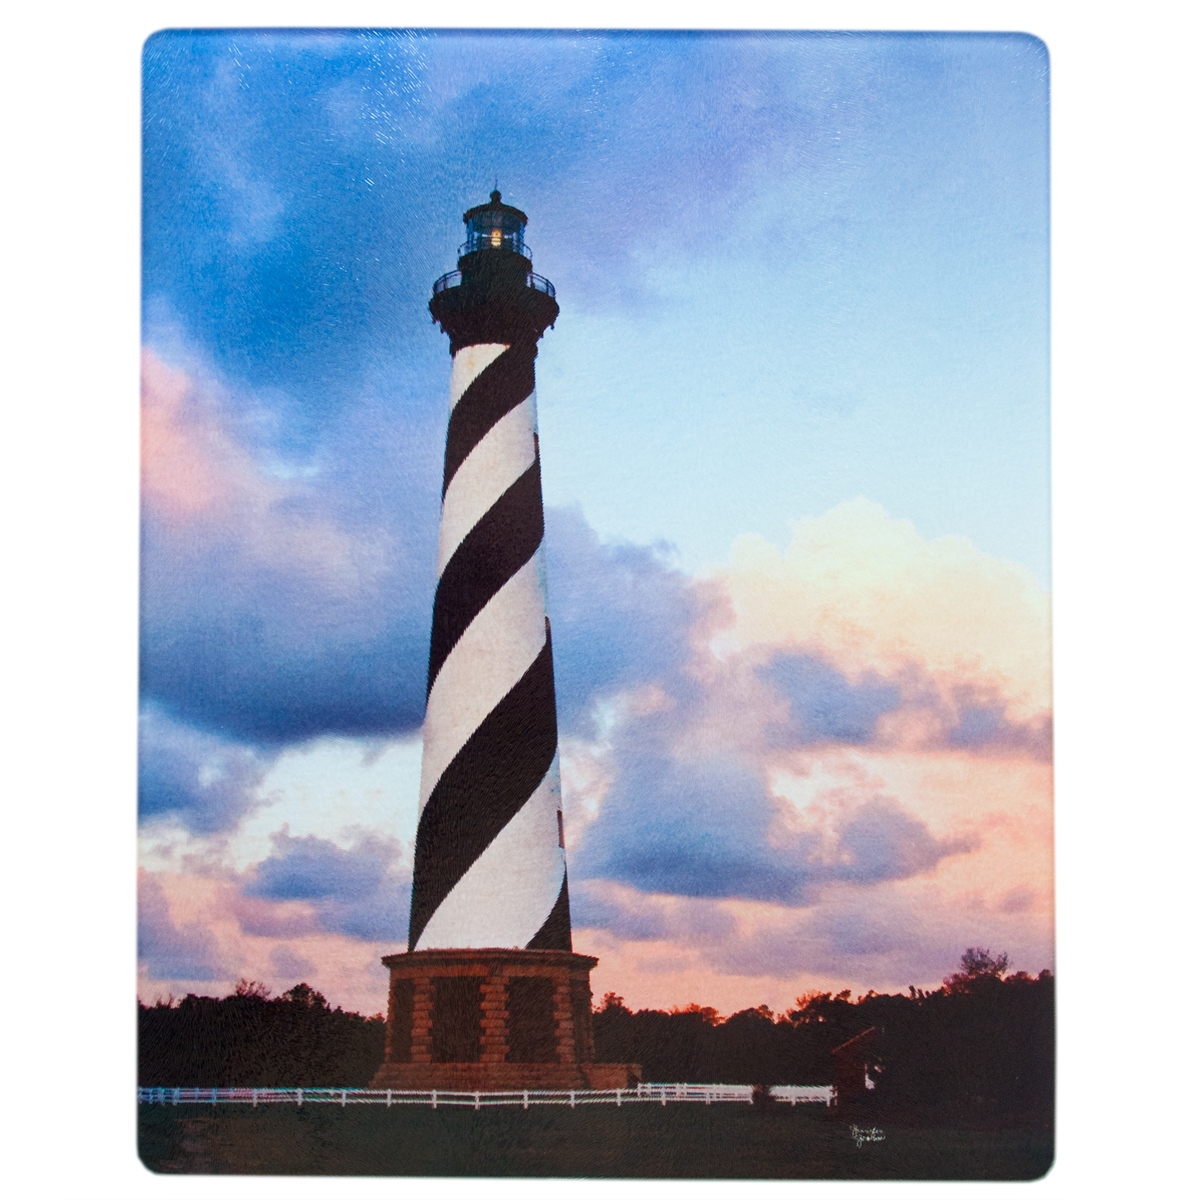 Cape Hatteras Lighthouse Tempered Glass Cutting Board Photography by Jennifer Johnson, Hatteras Island, OBX, NC